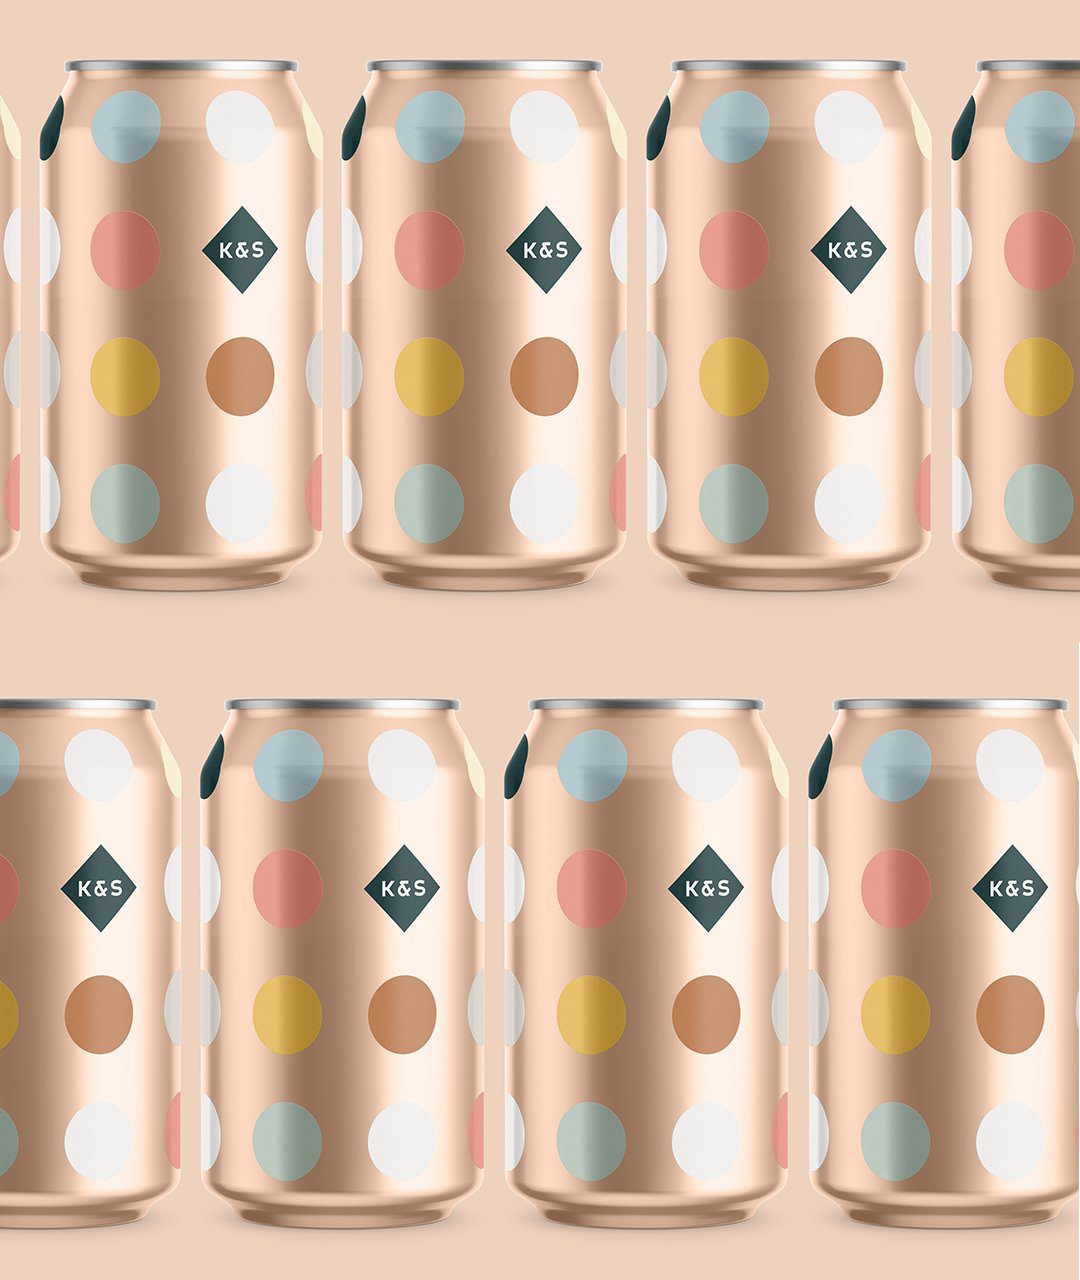 Kingdom and sparrow branded 300ml cans showcasing colour palette